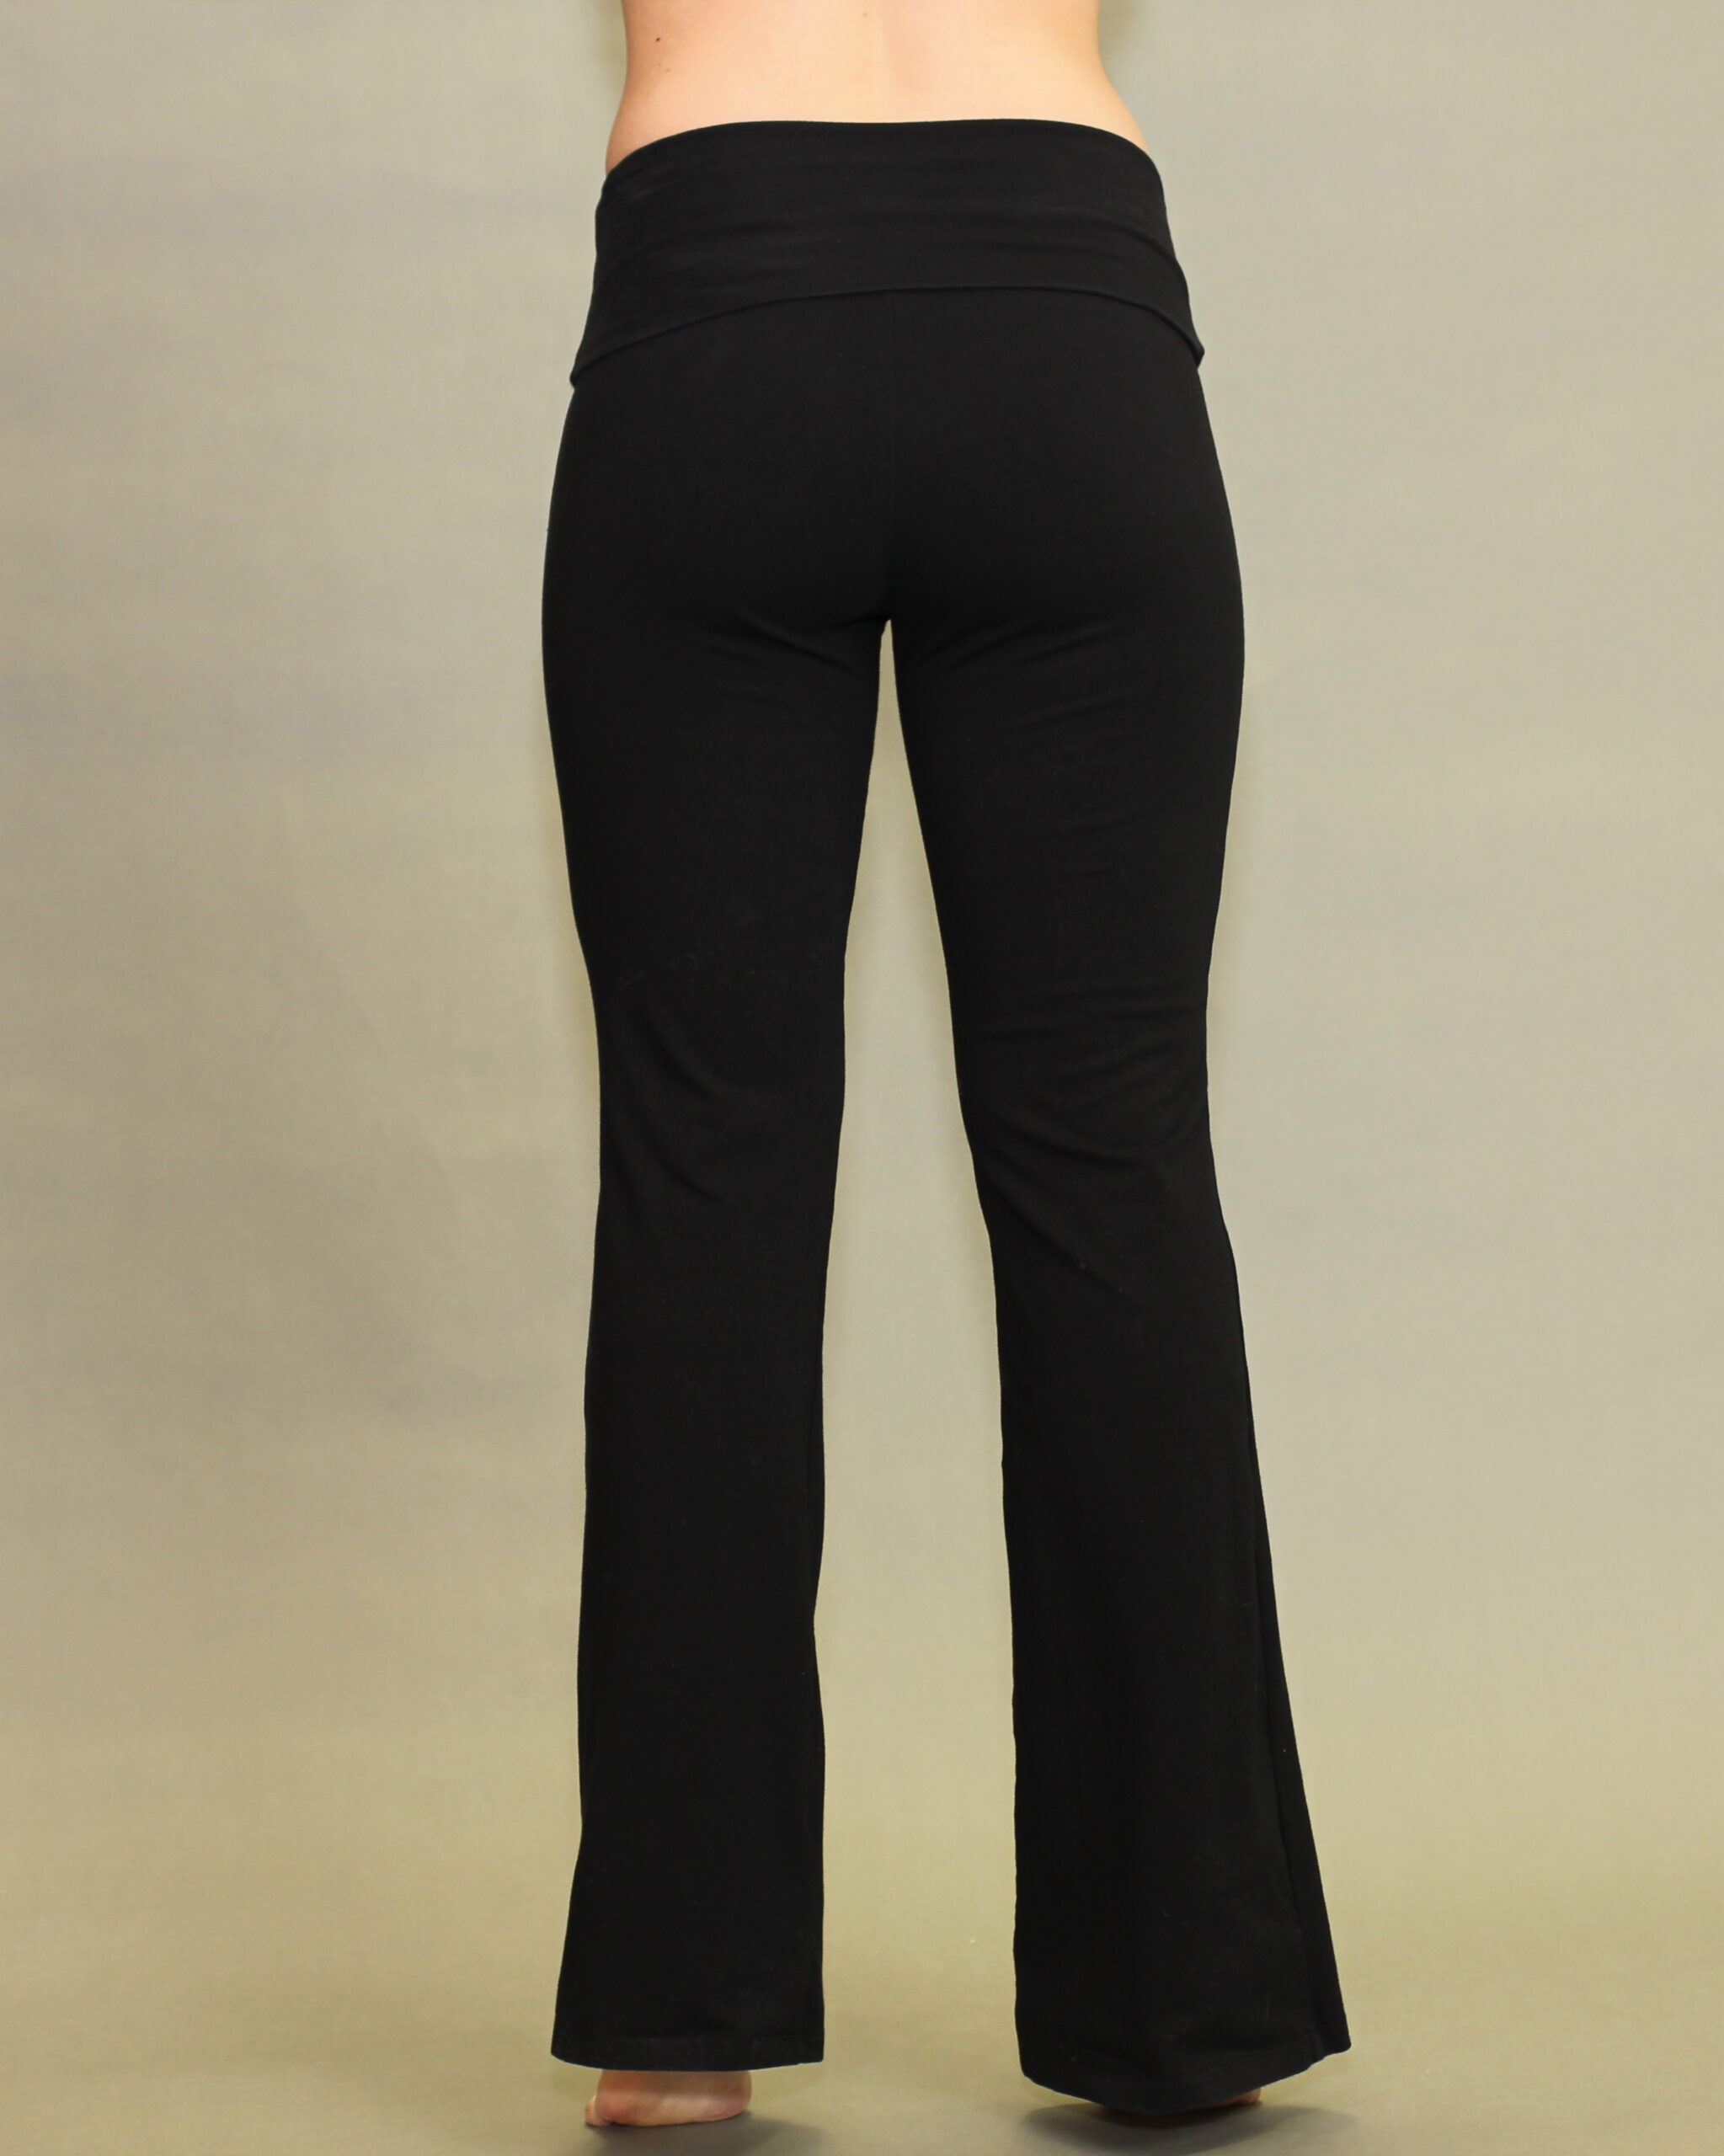 Unique Styles Fold-Over Waistband Stretchy Cotton Blend Yoga Pants